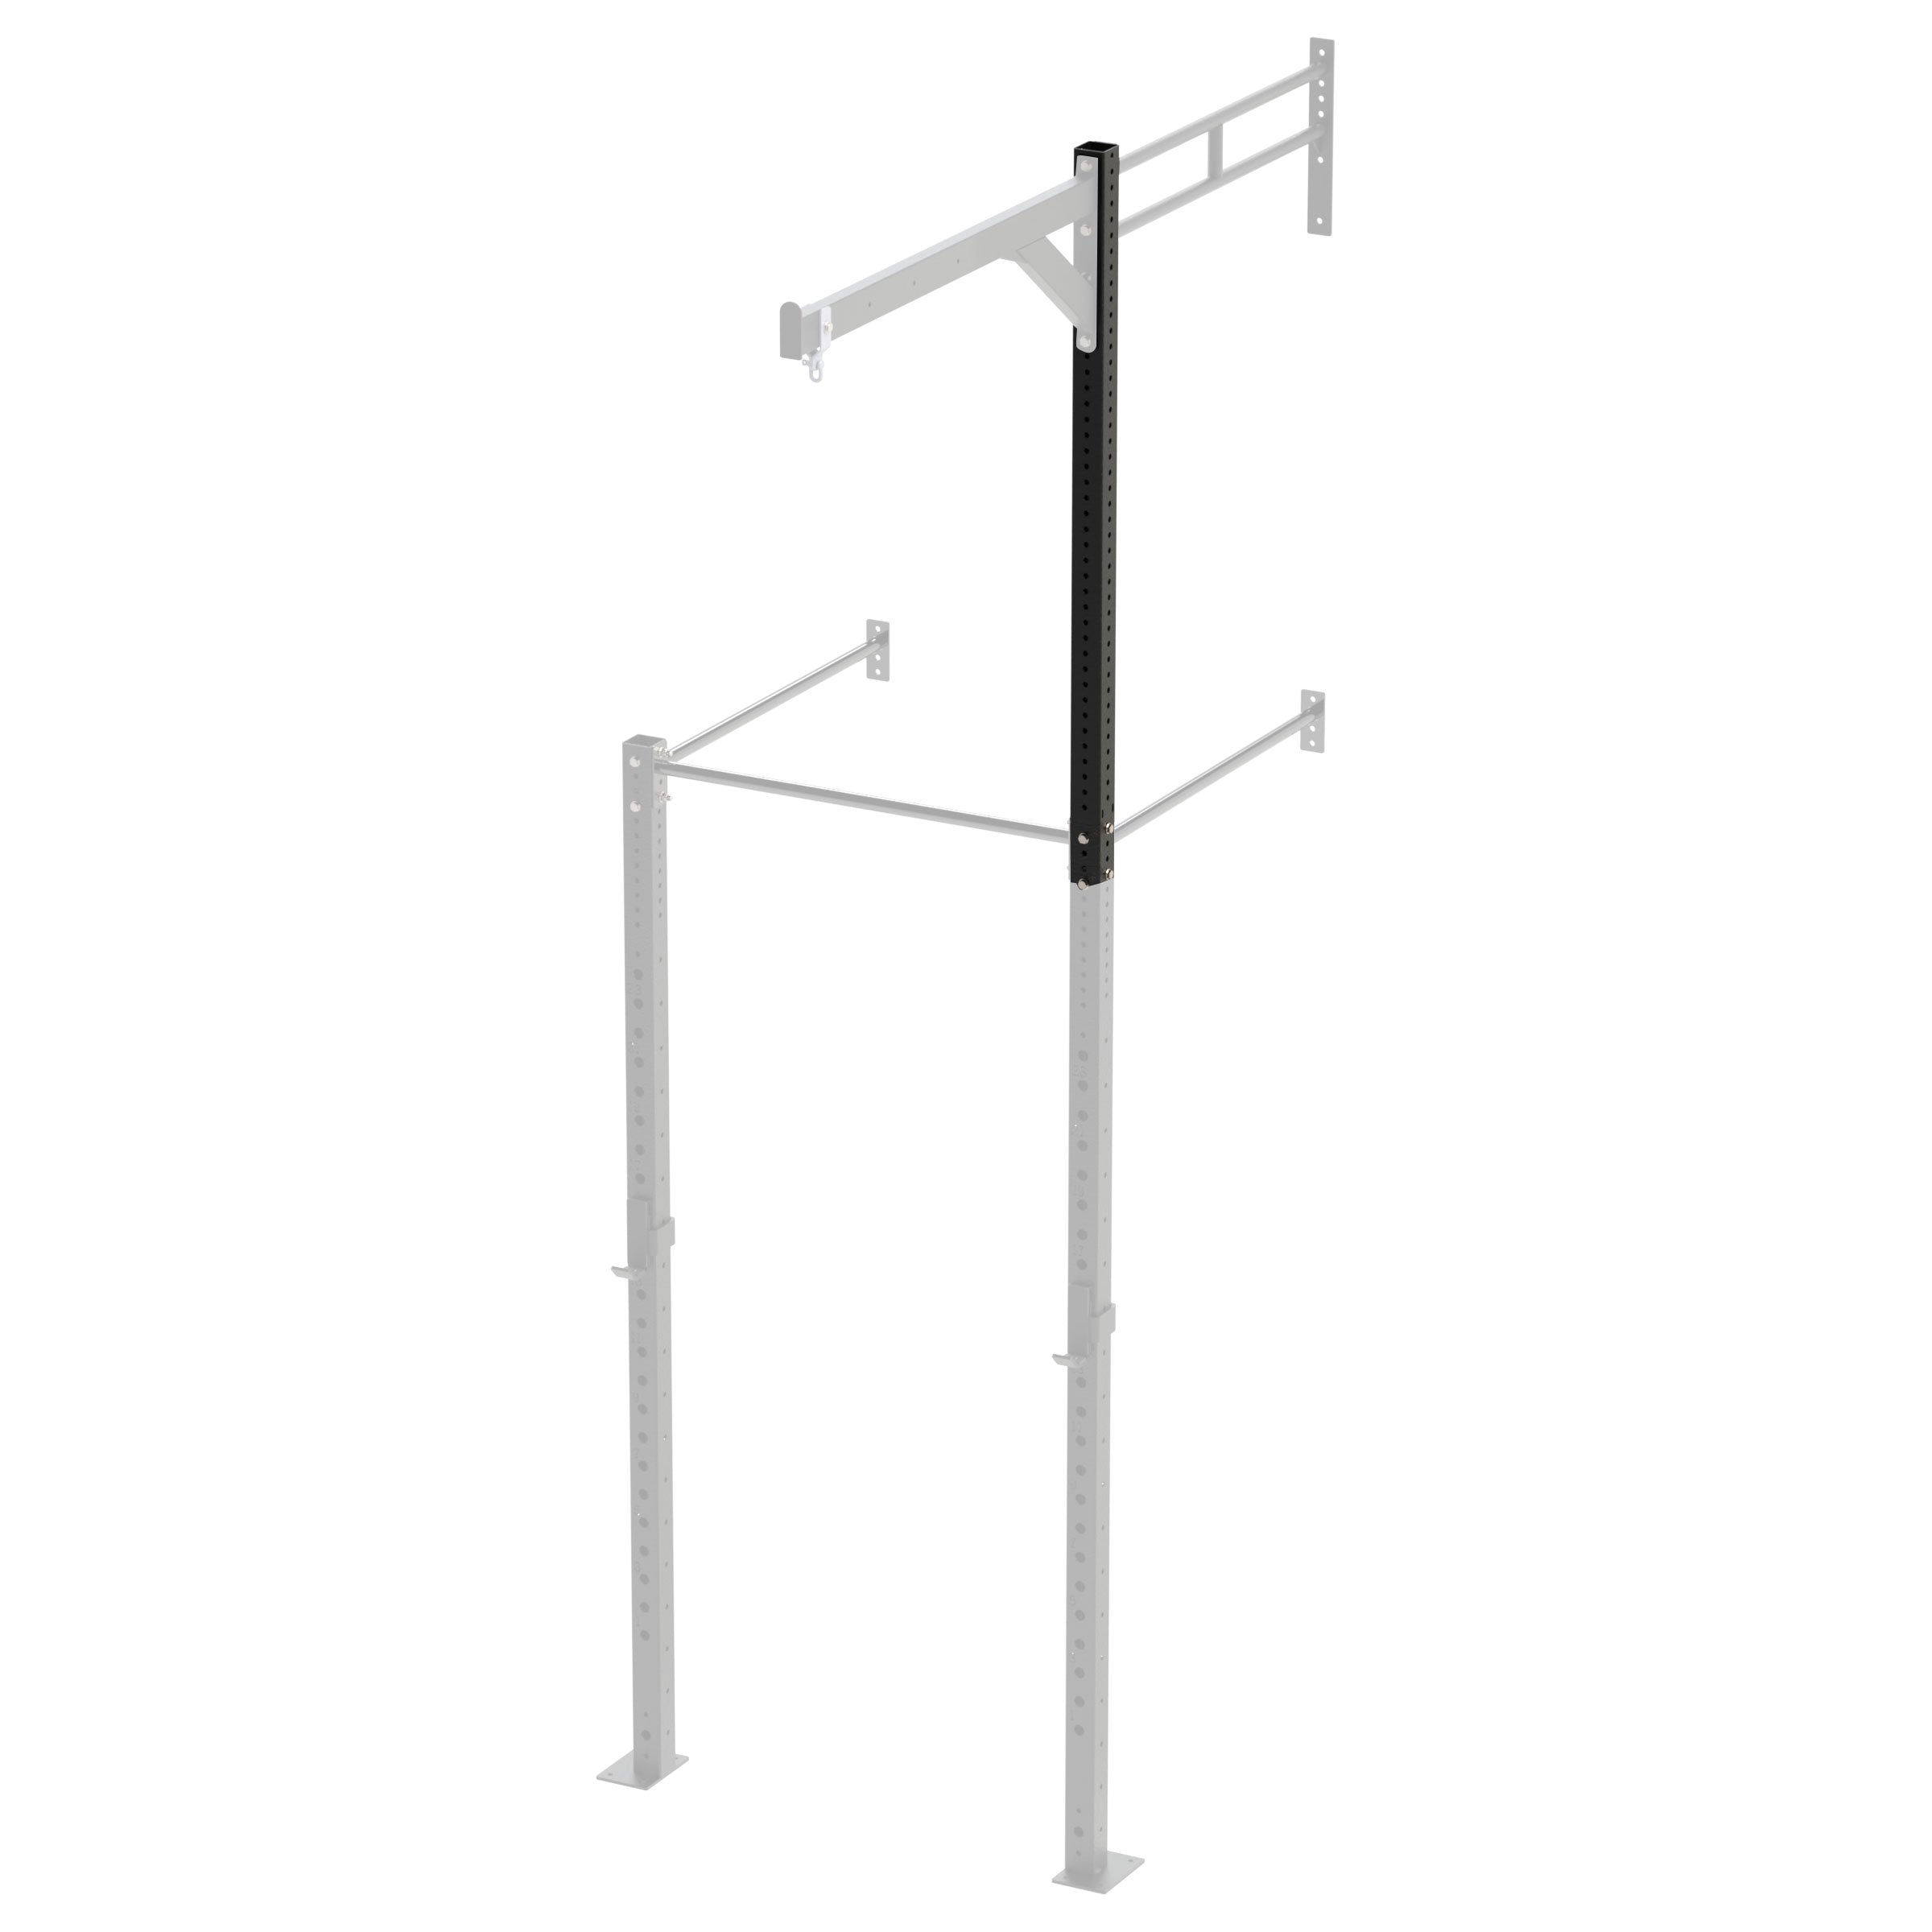 Bison Series - Upright Extension (1.5m) - Wolverson Fitness